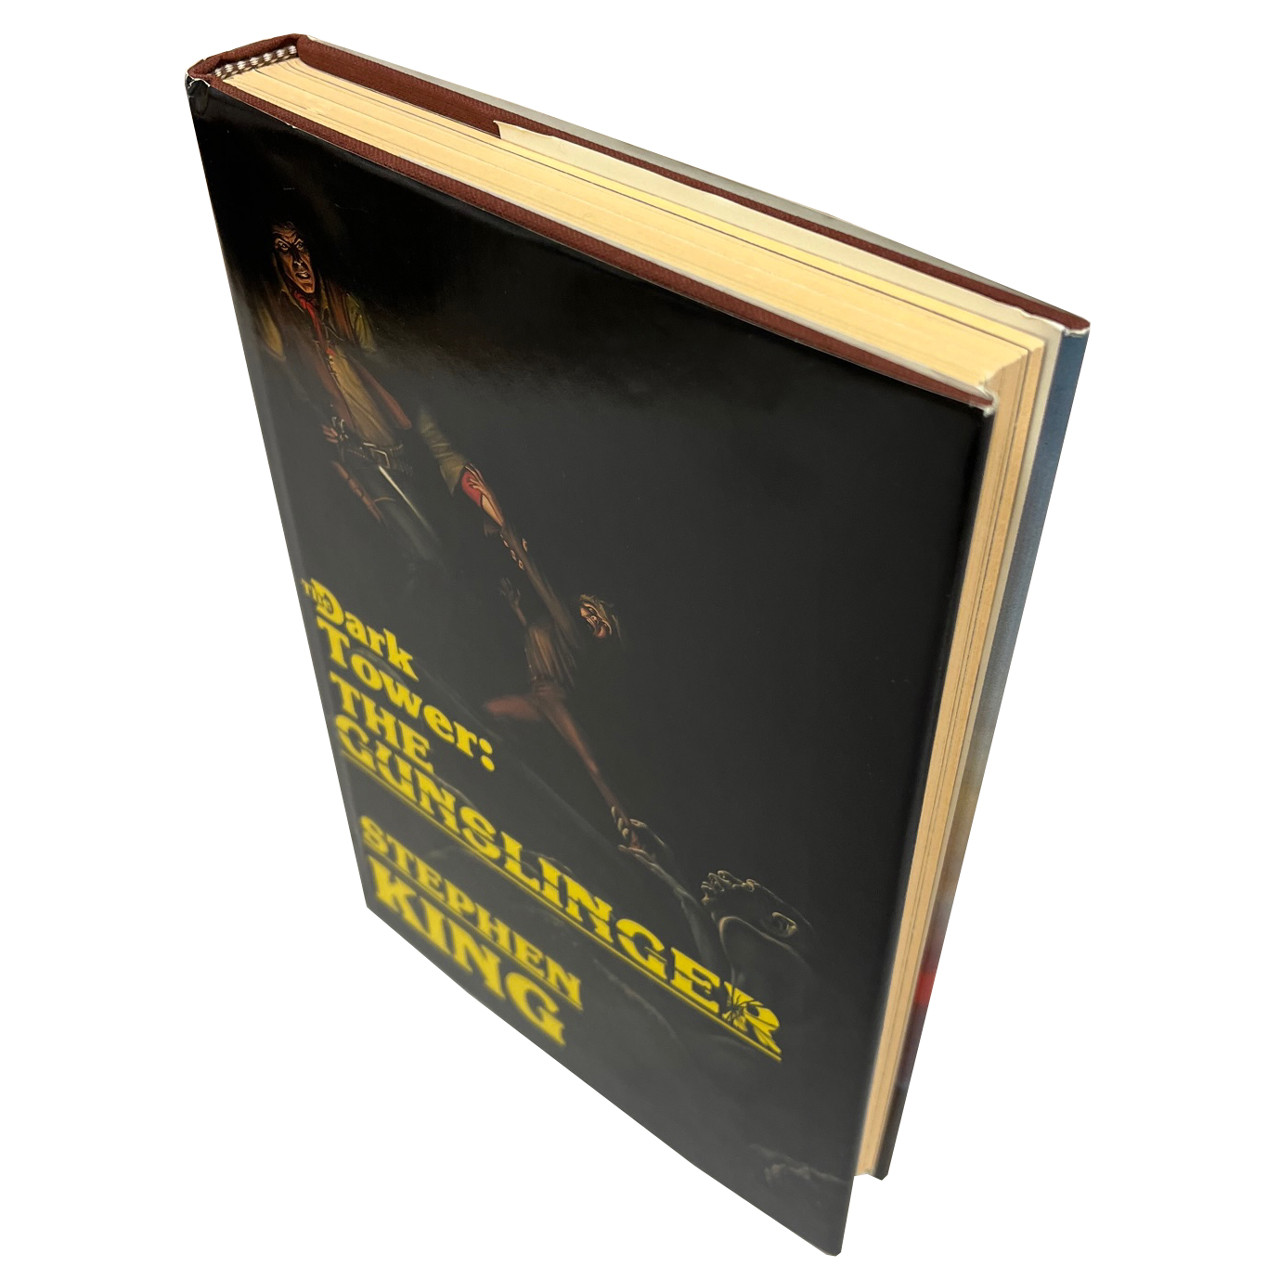 Stephen King "The Dark Tower: The Gunslinger" First Edition, First Printing, Slipcased [F/NF+]